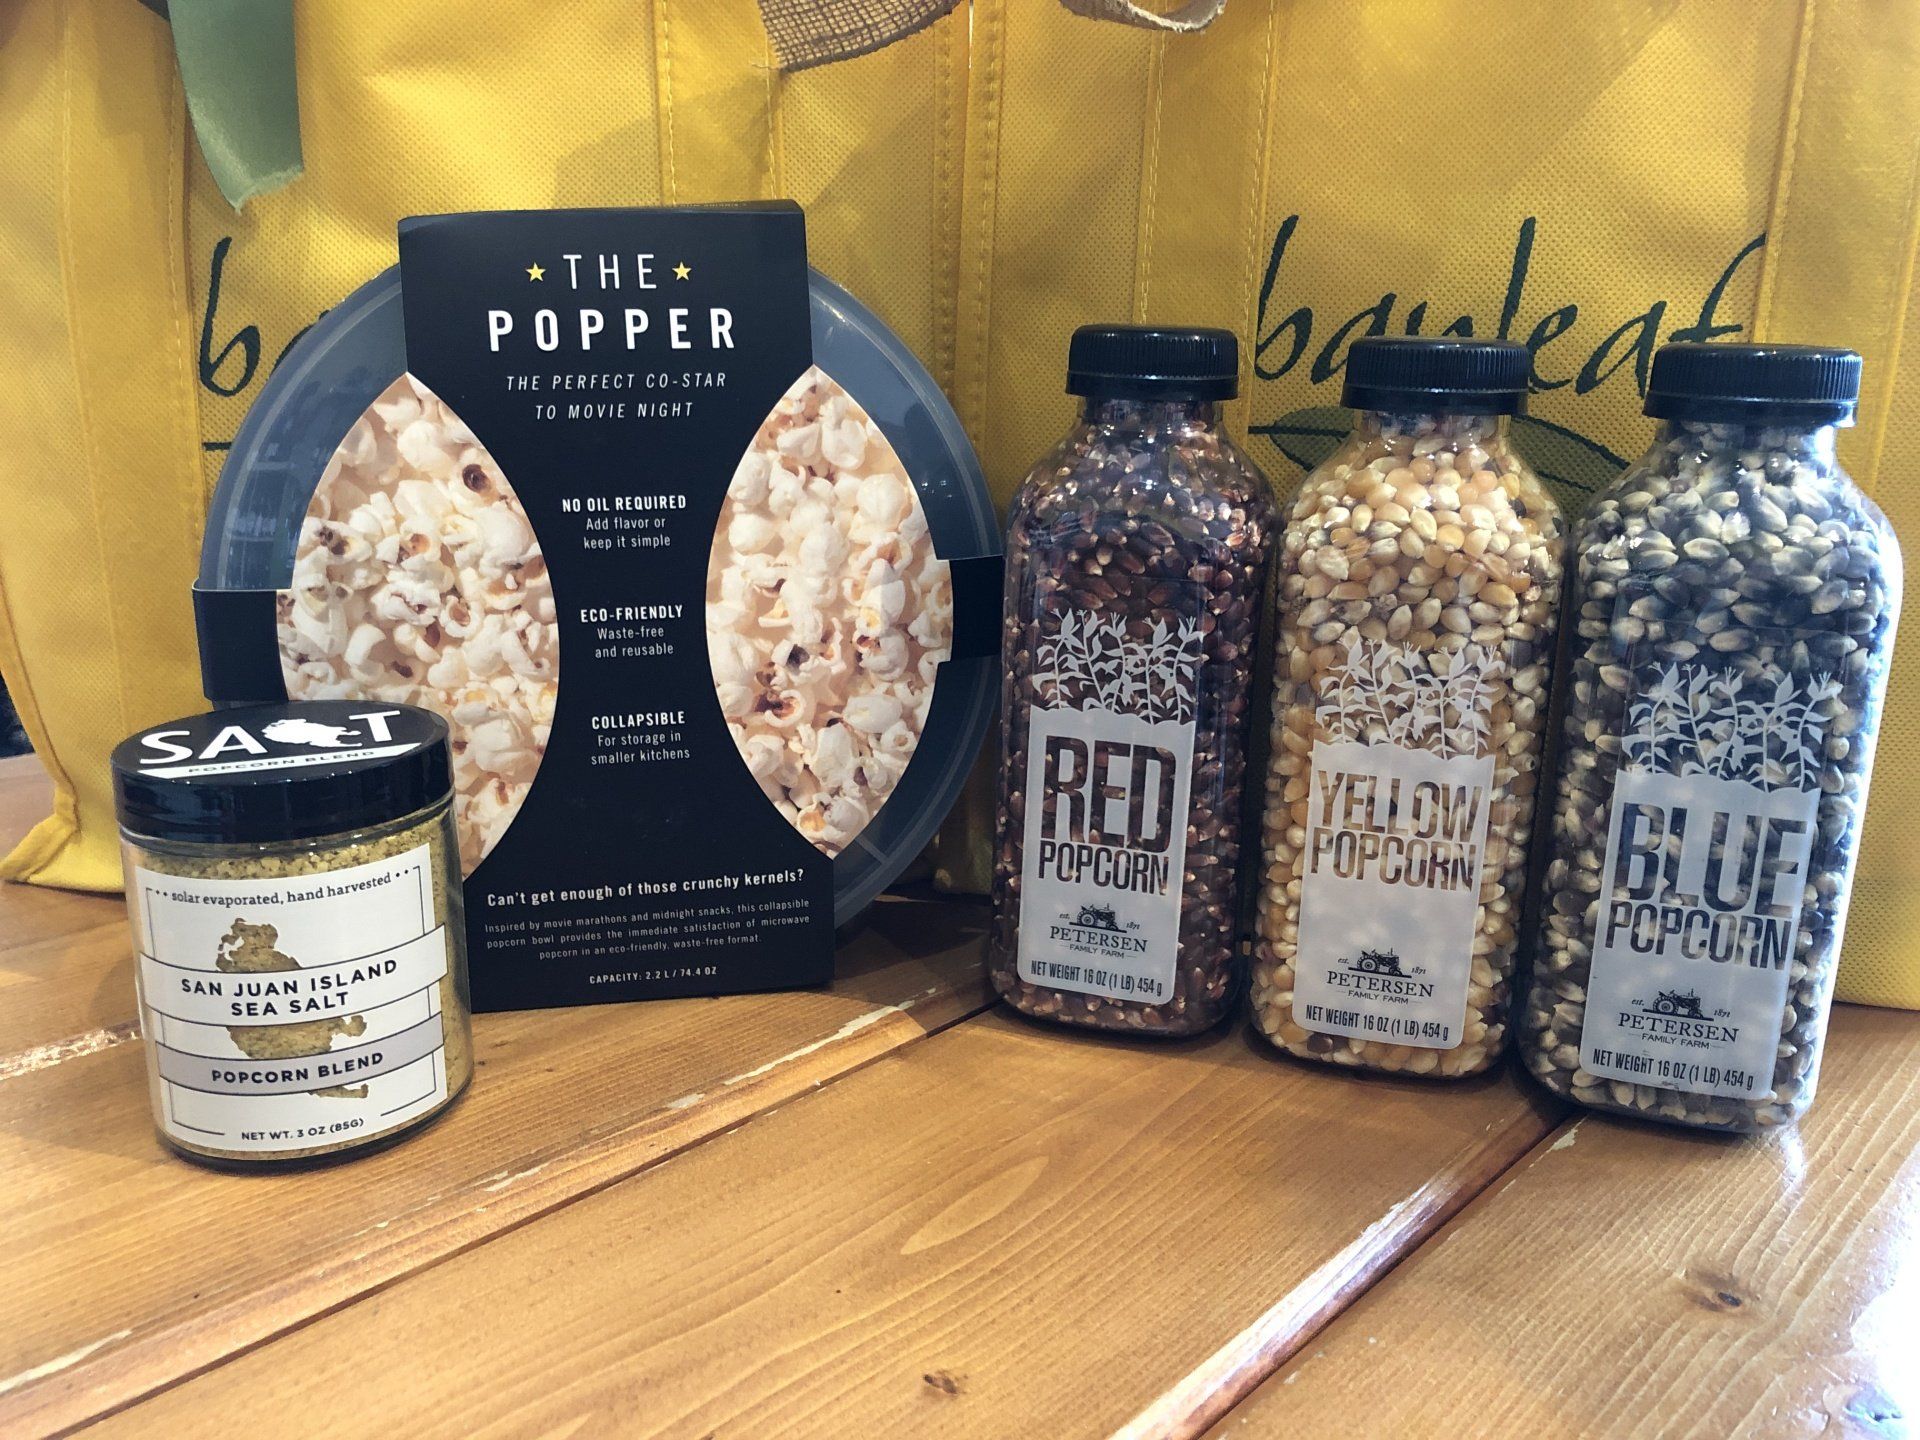 The Popper - Great Christmas Gift Idea